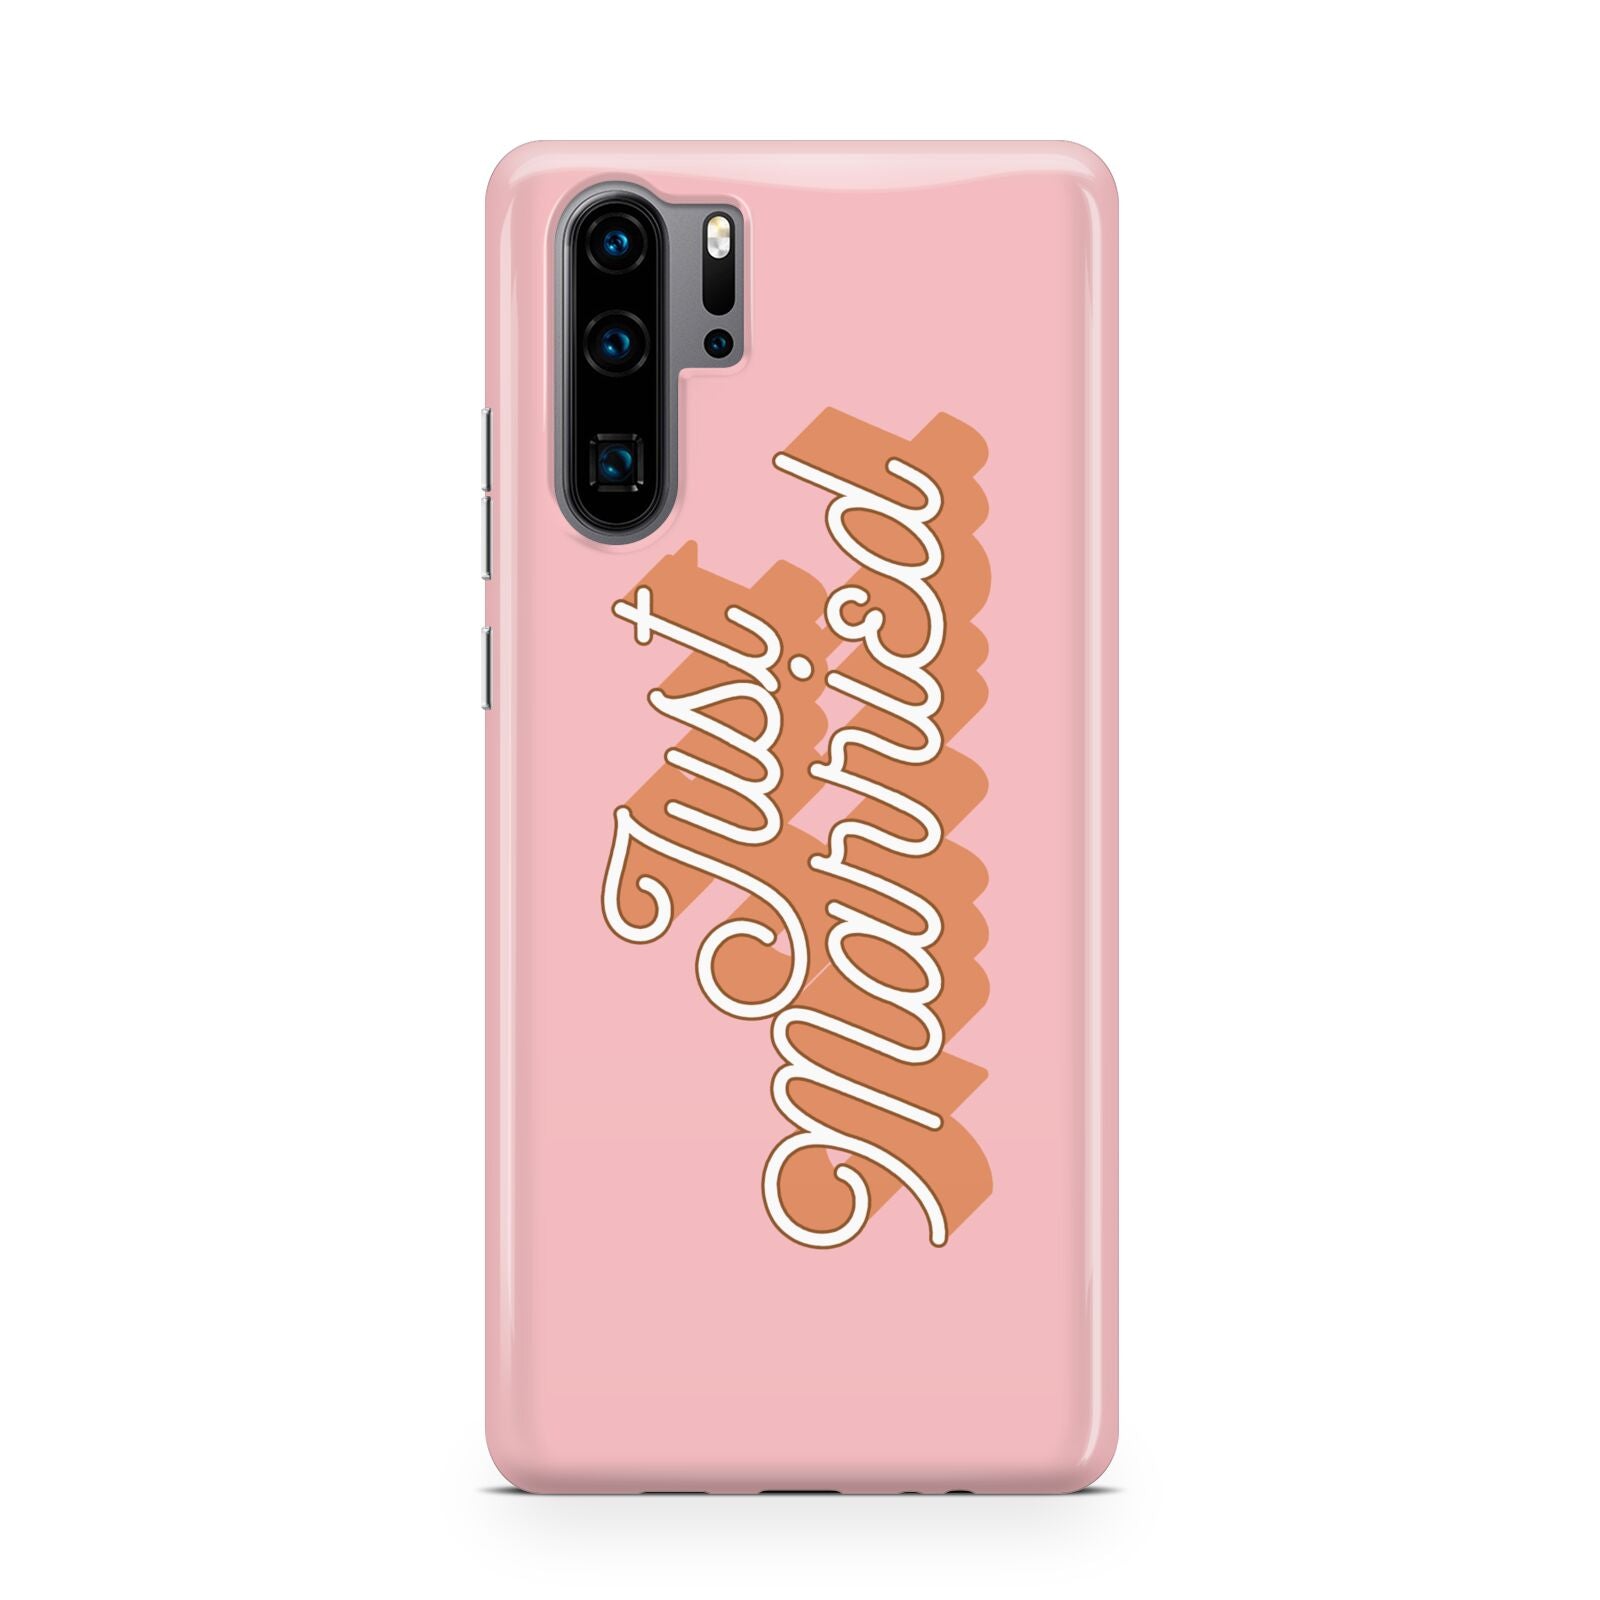 Just Married Pink Huawei P30 Pro Phone Case